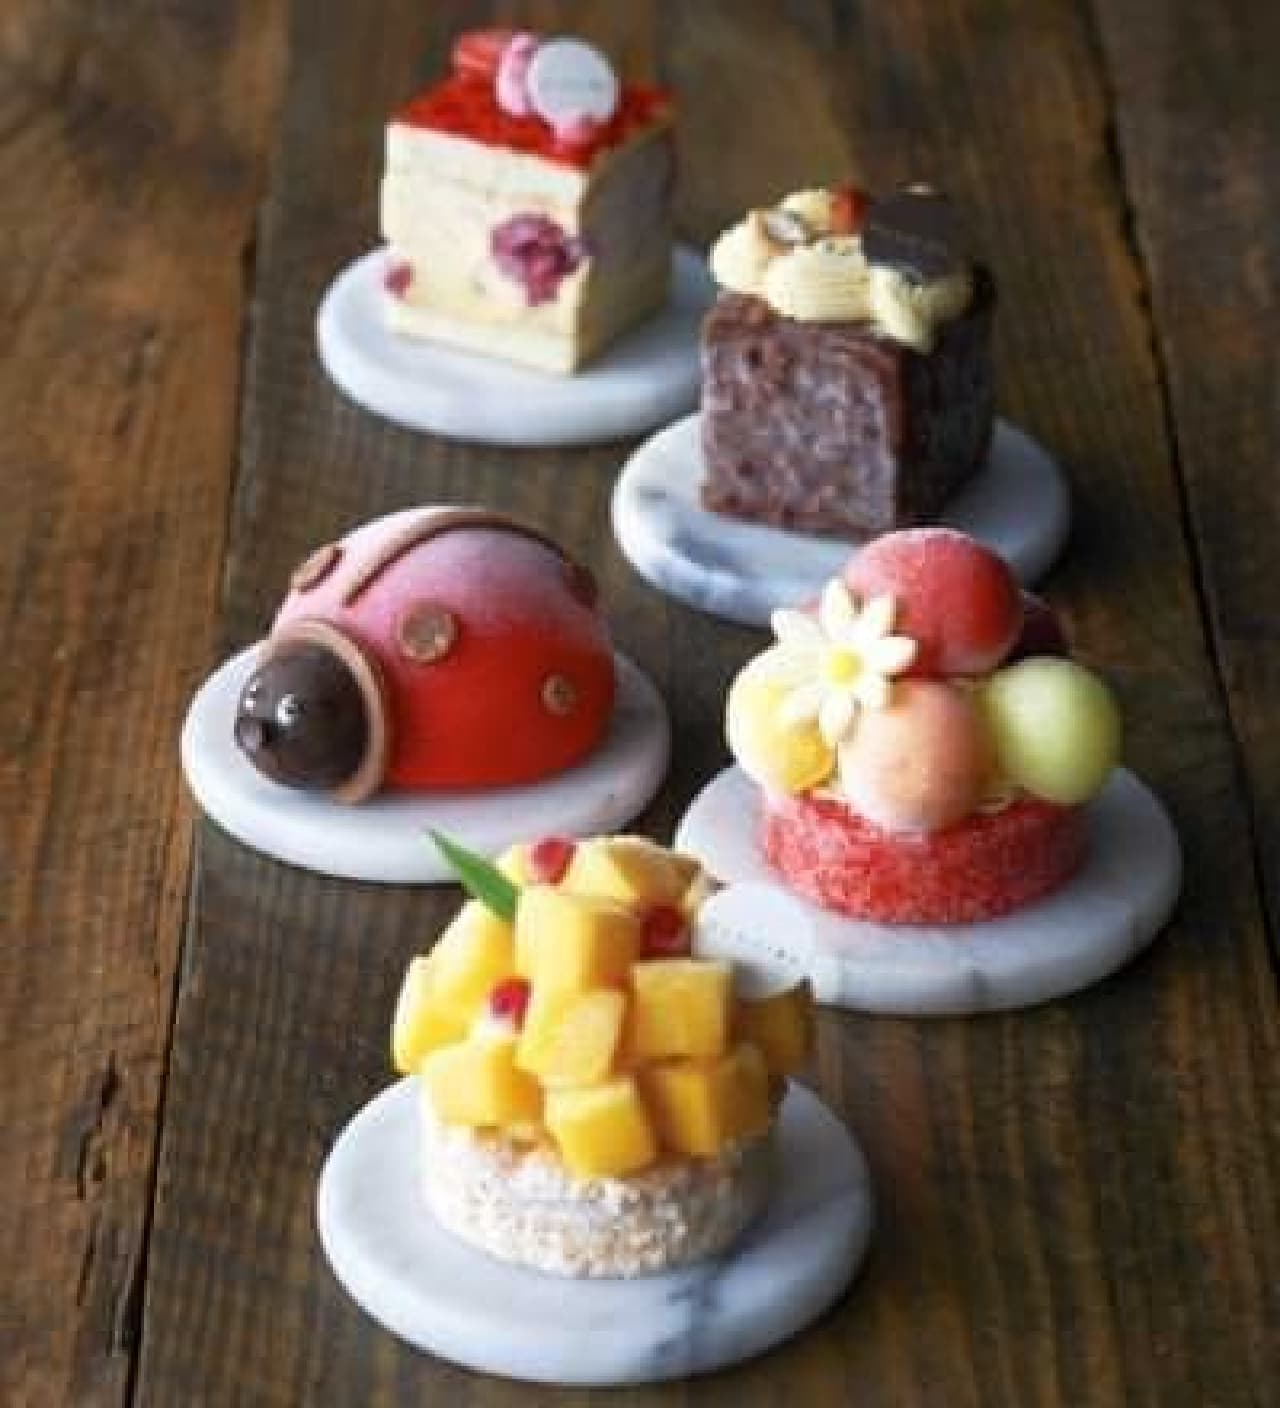 Assortment of 5 kinds of beautiful ice cakes